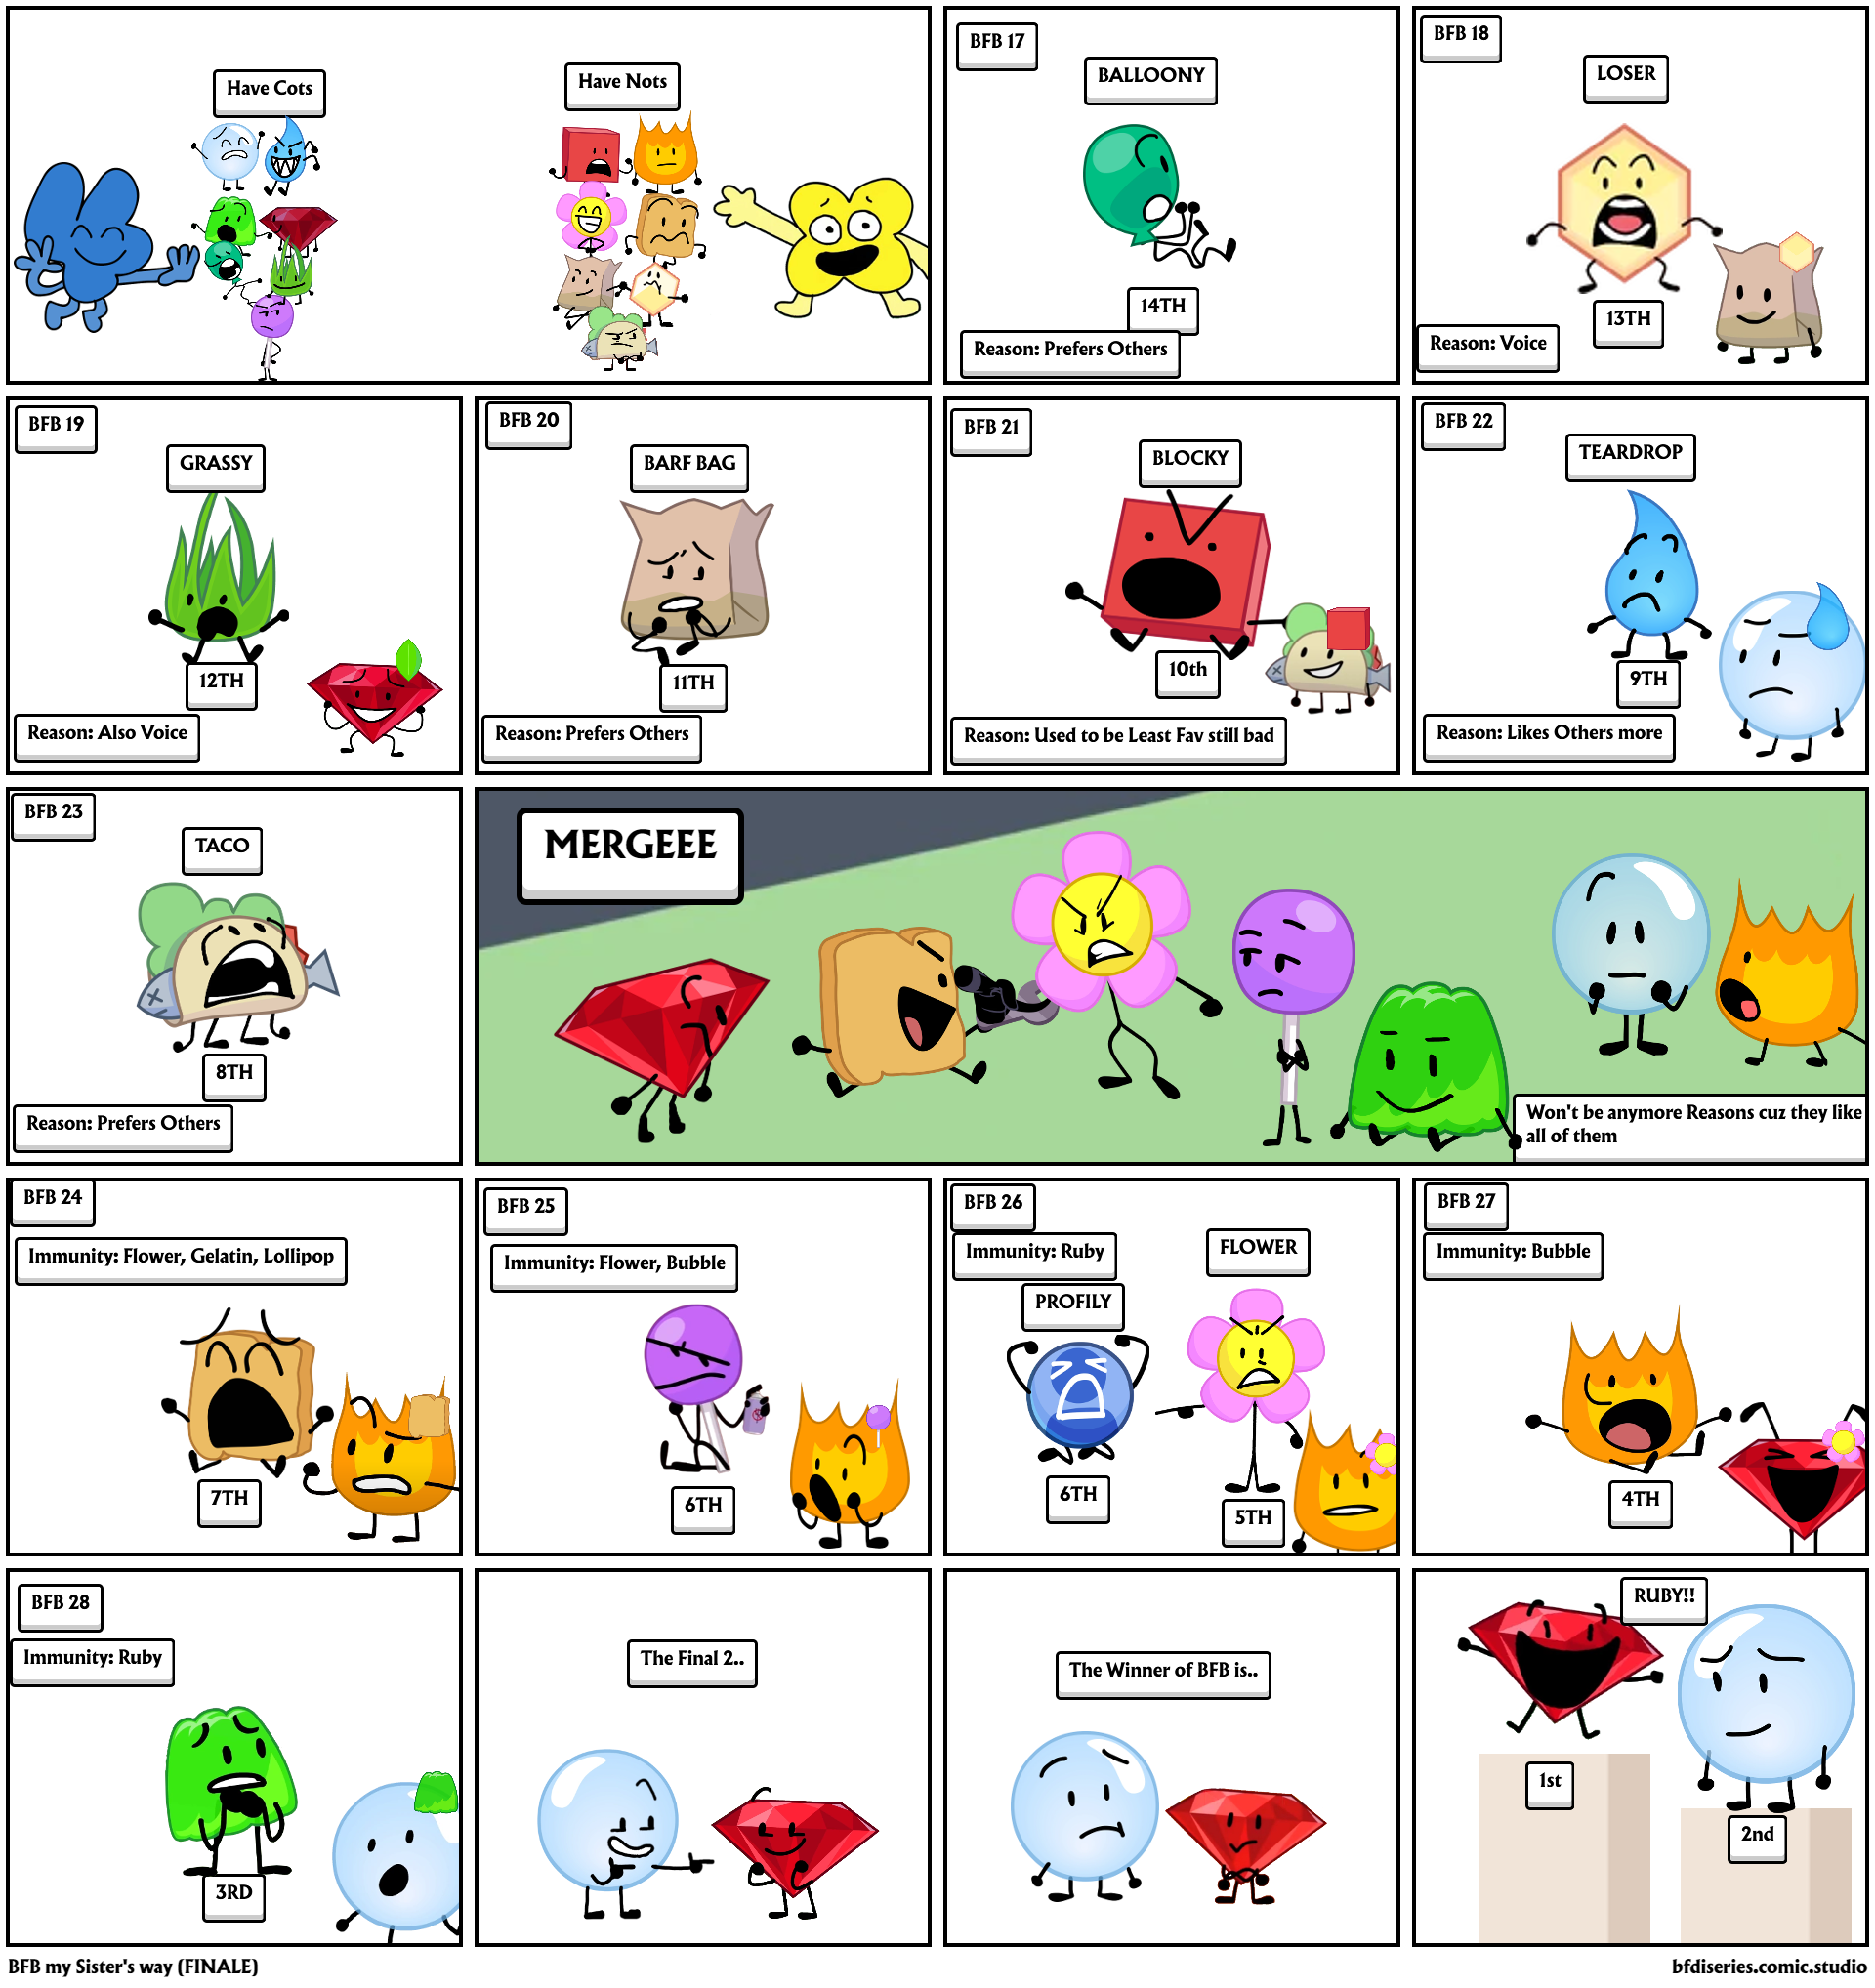 BFB my Sister's way (FINALE)